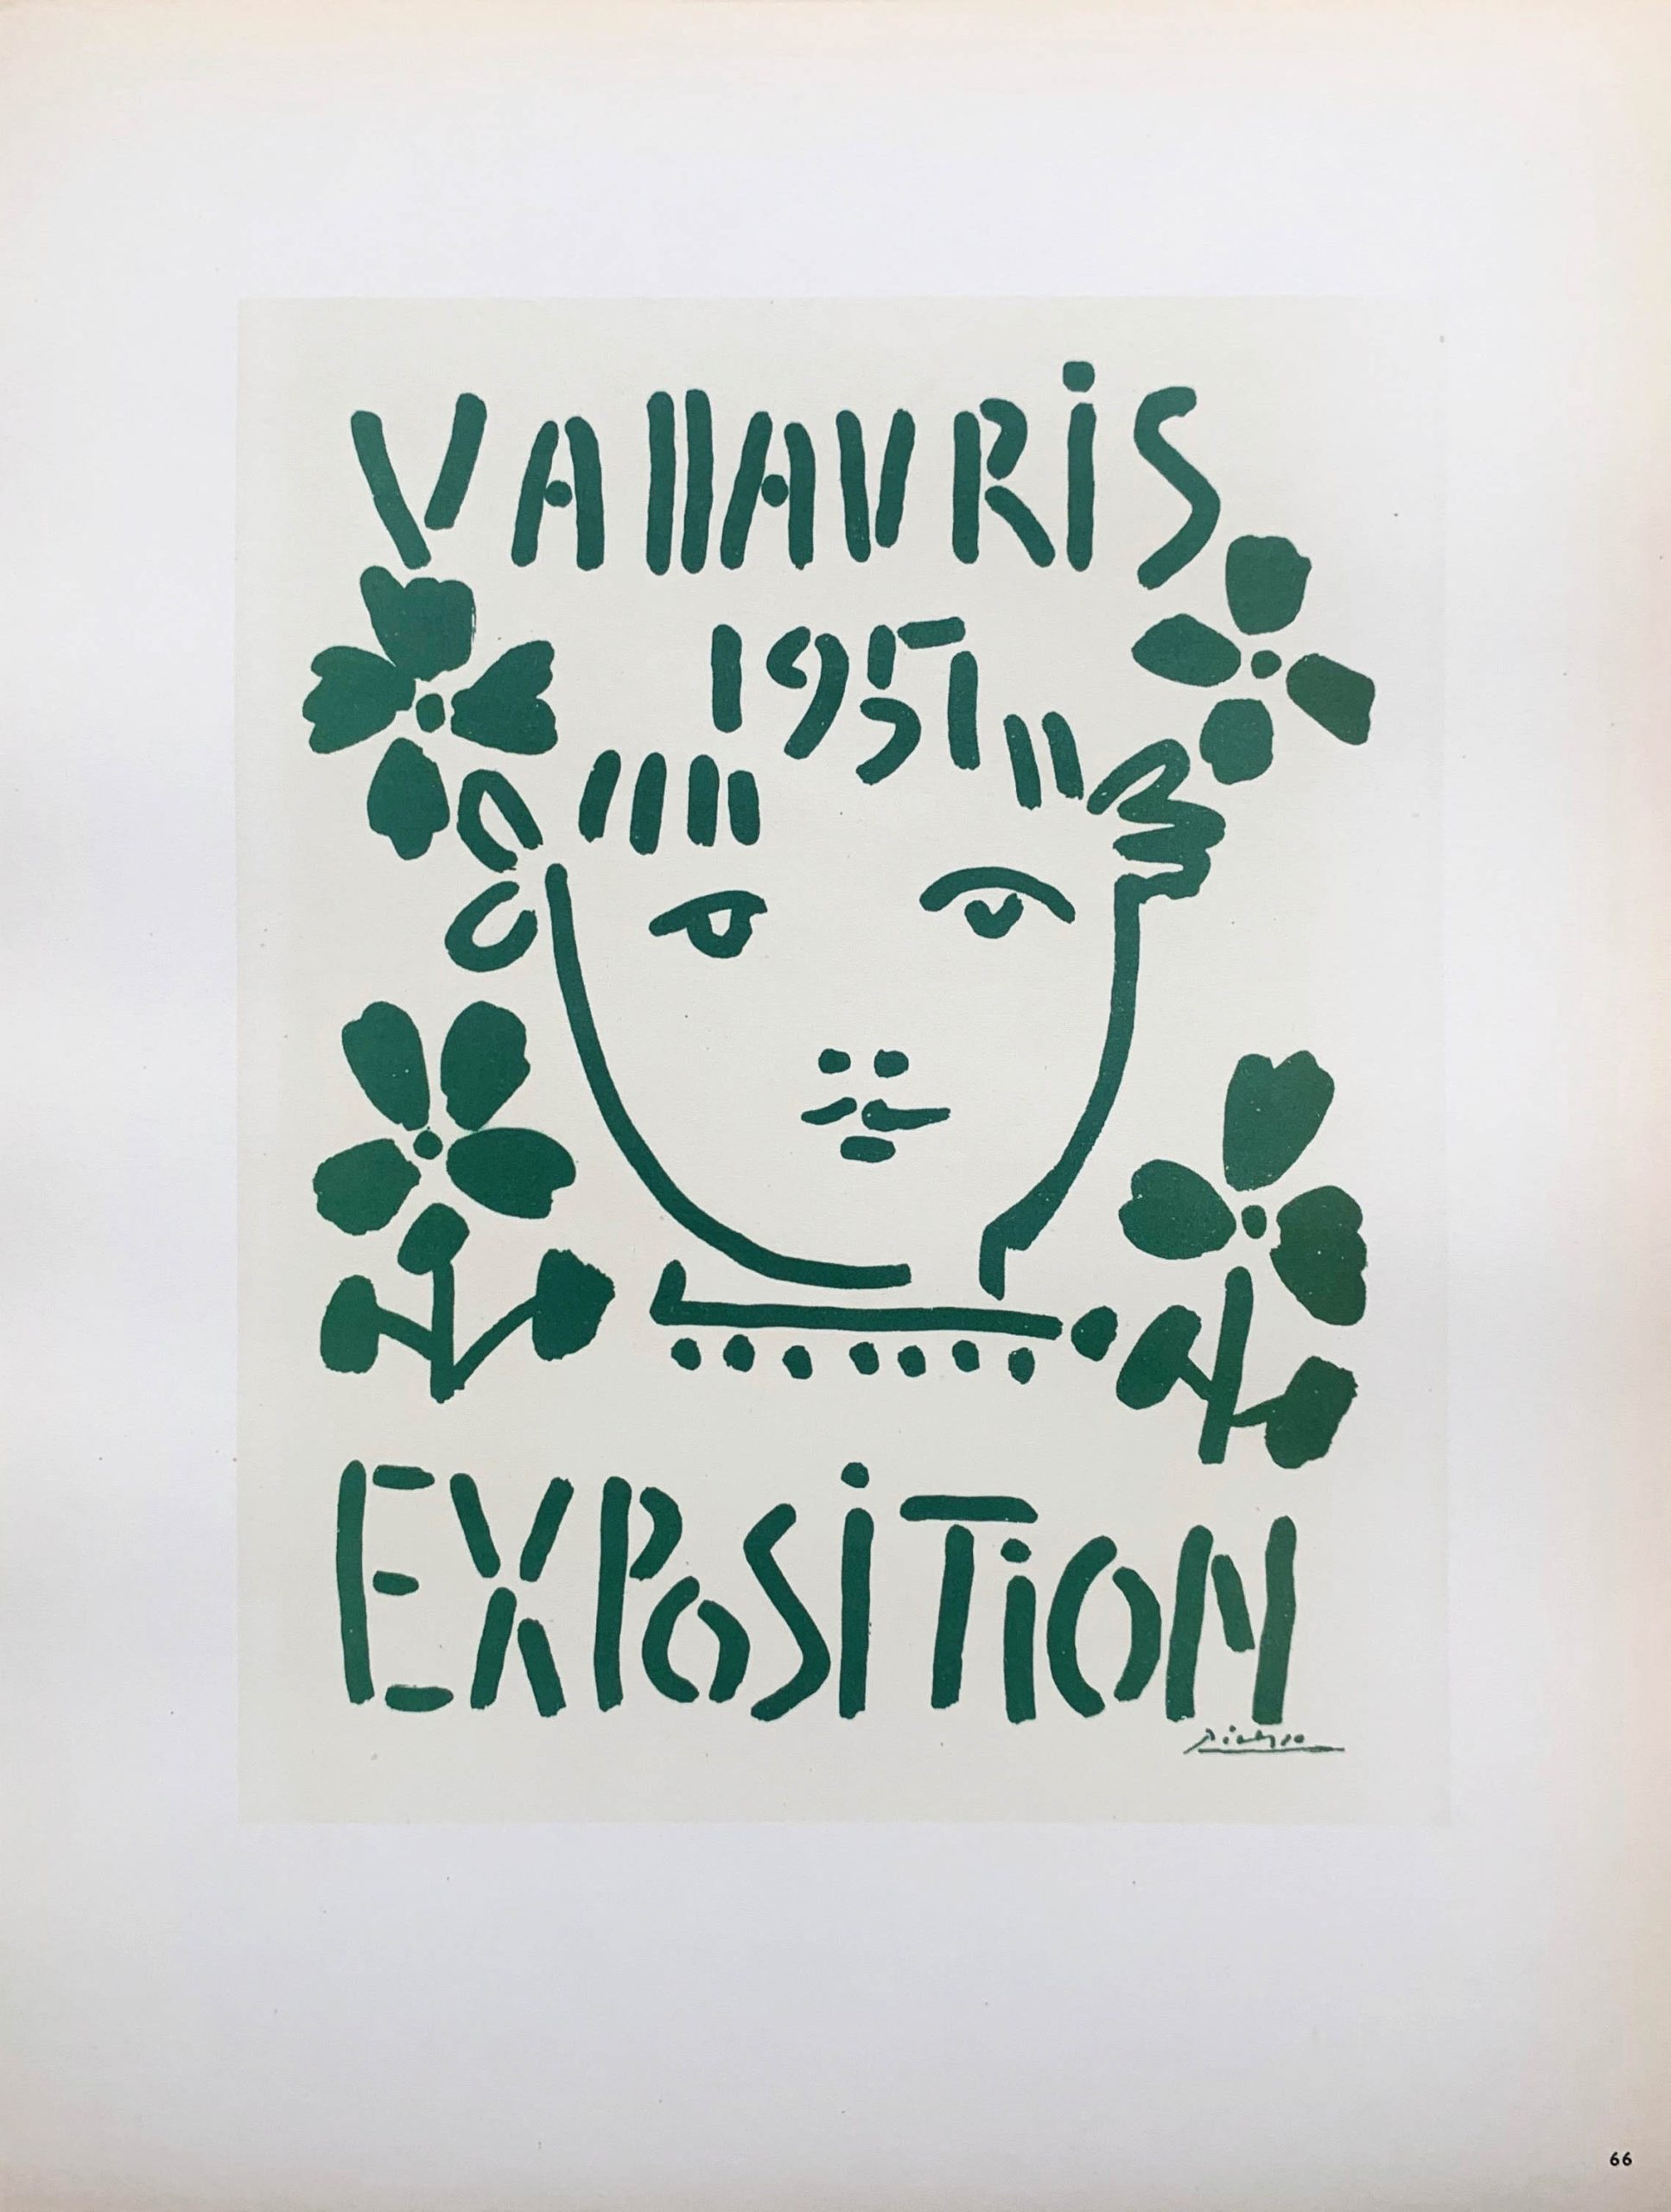 picasso-lithograph-66-expo-vallaris-1951-art-in-posters